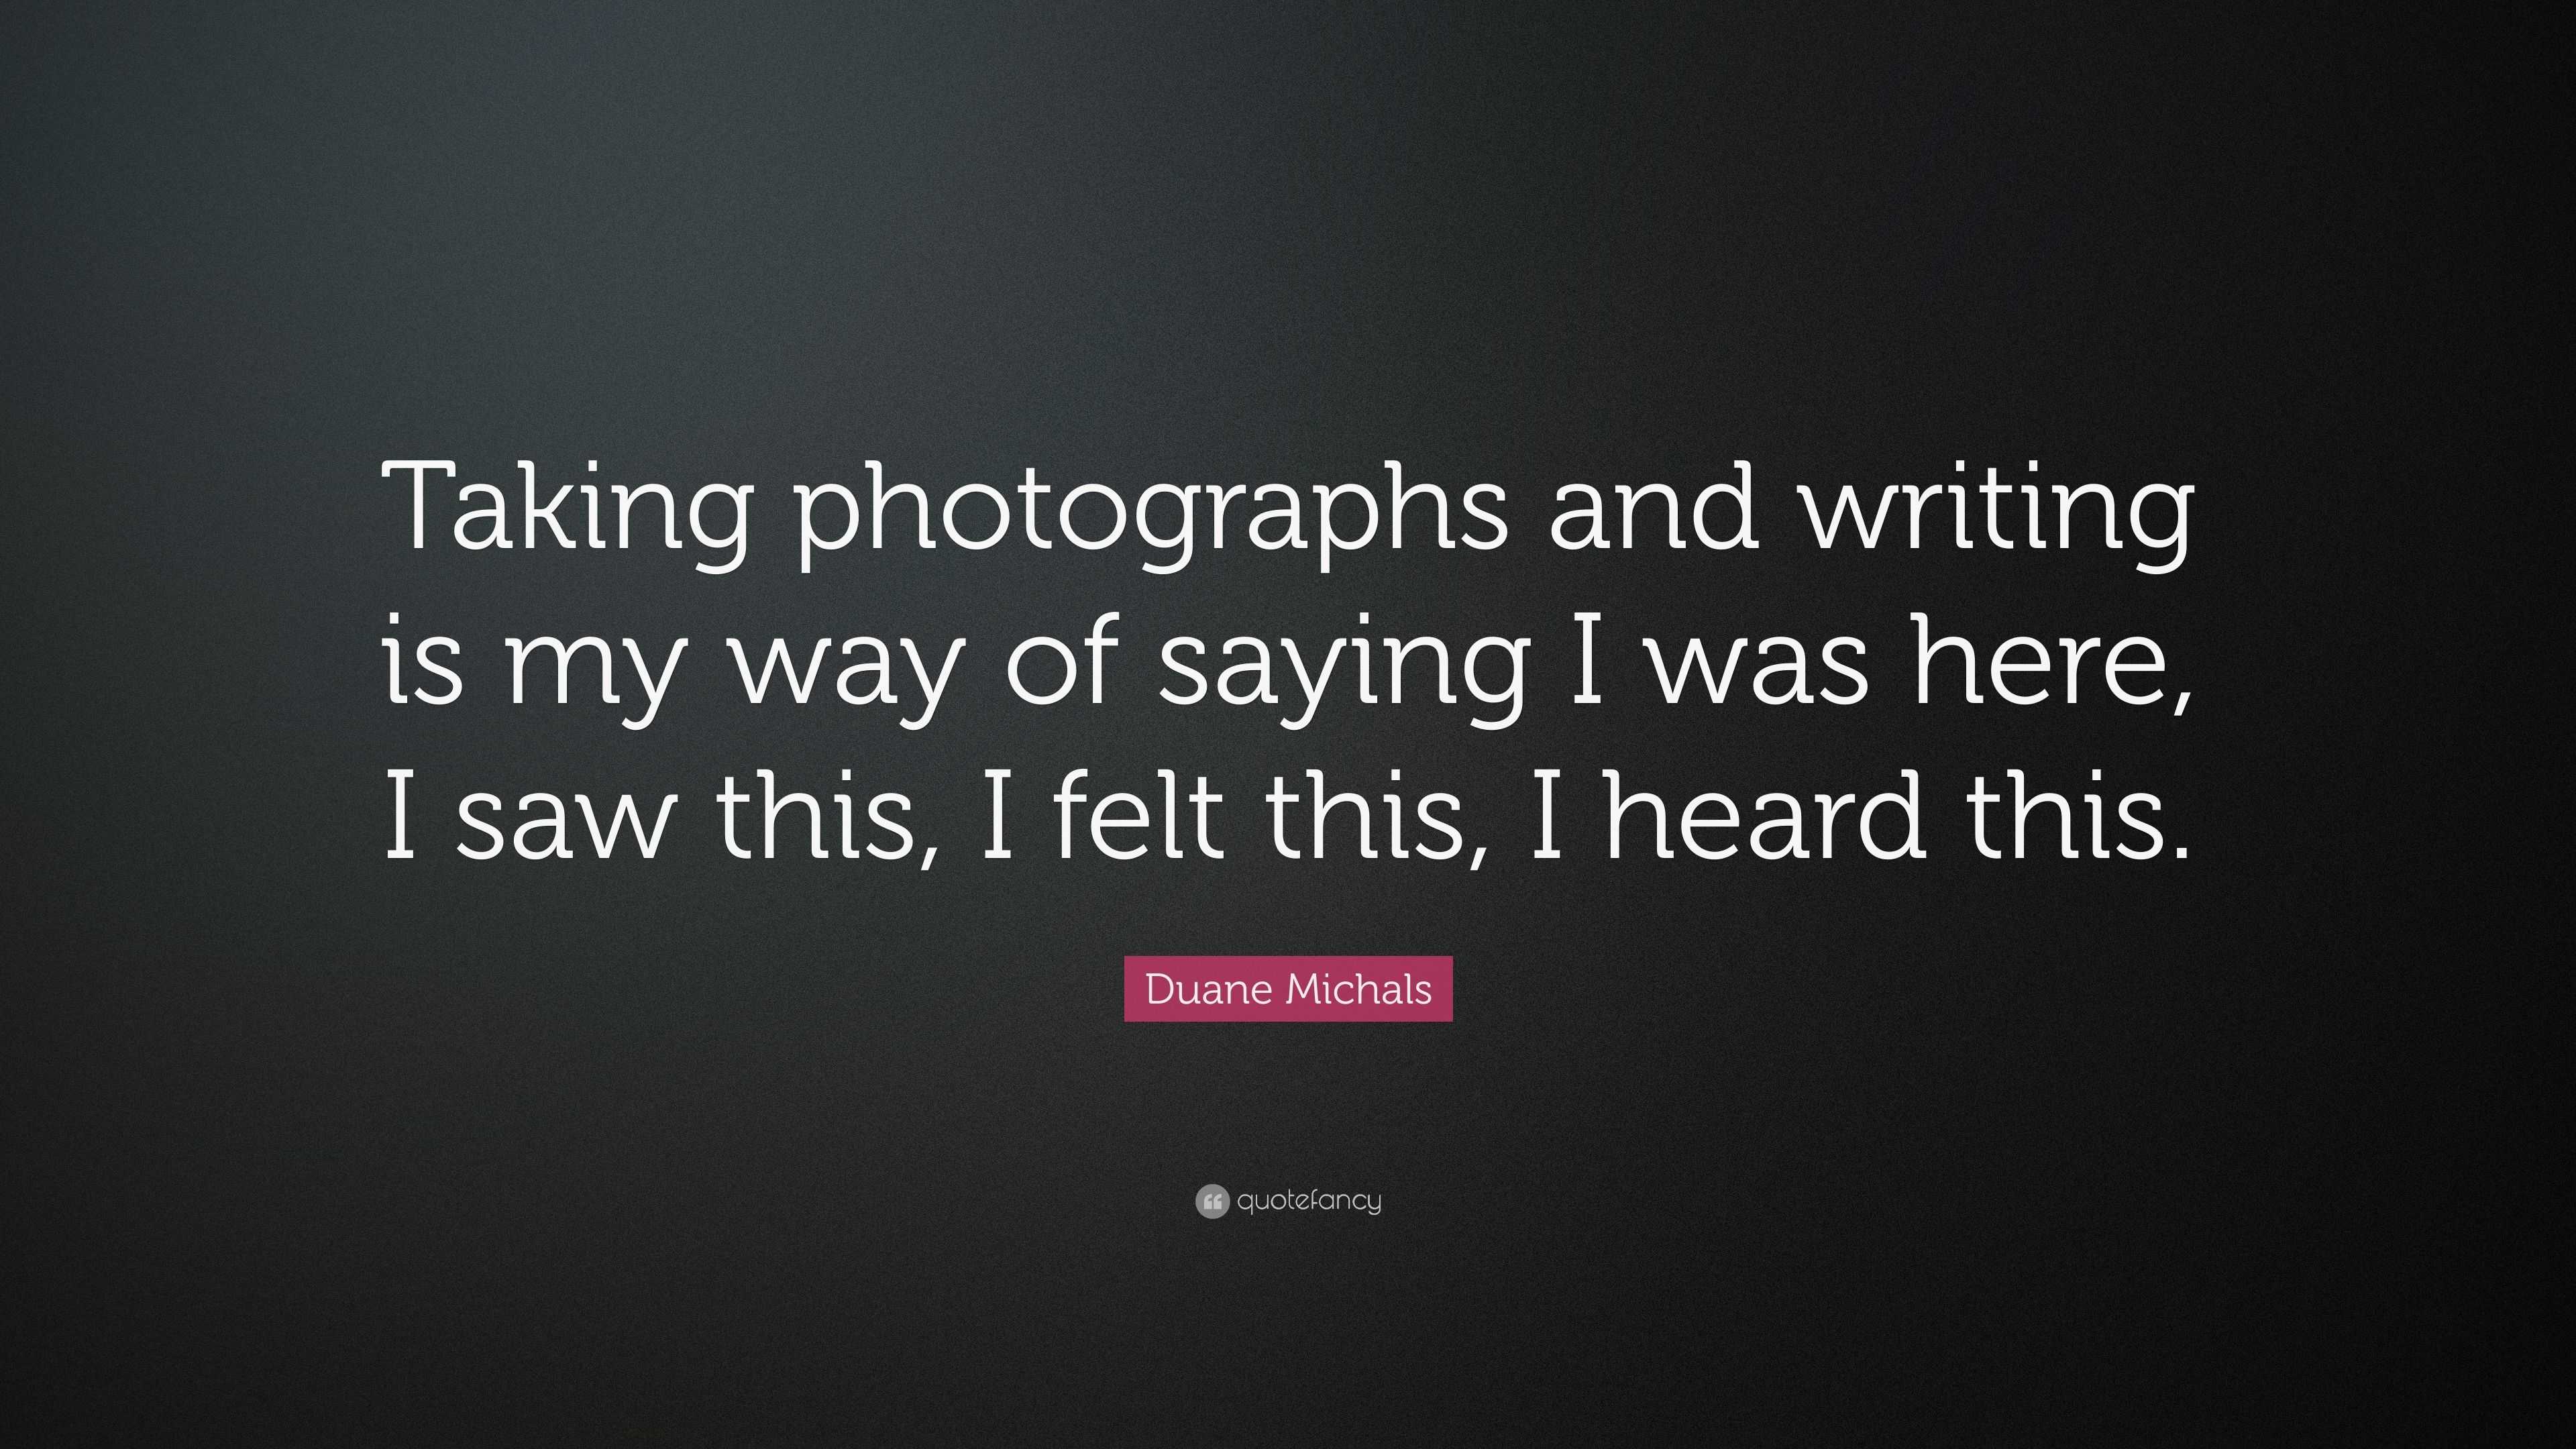 Duane Michals Quote: “Taking photographs and writing is my way of ...